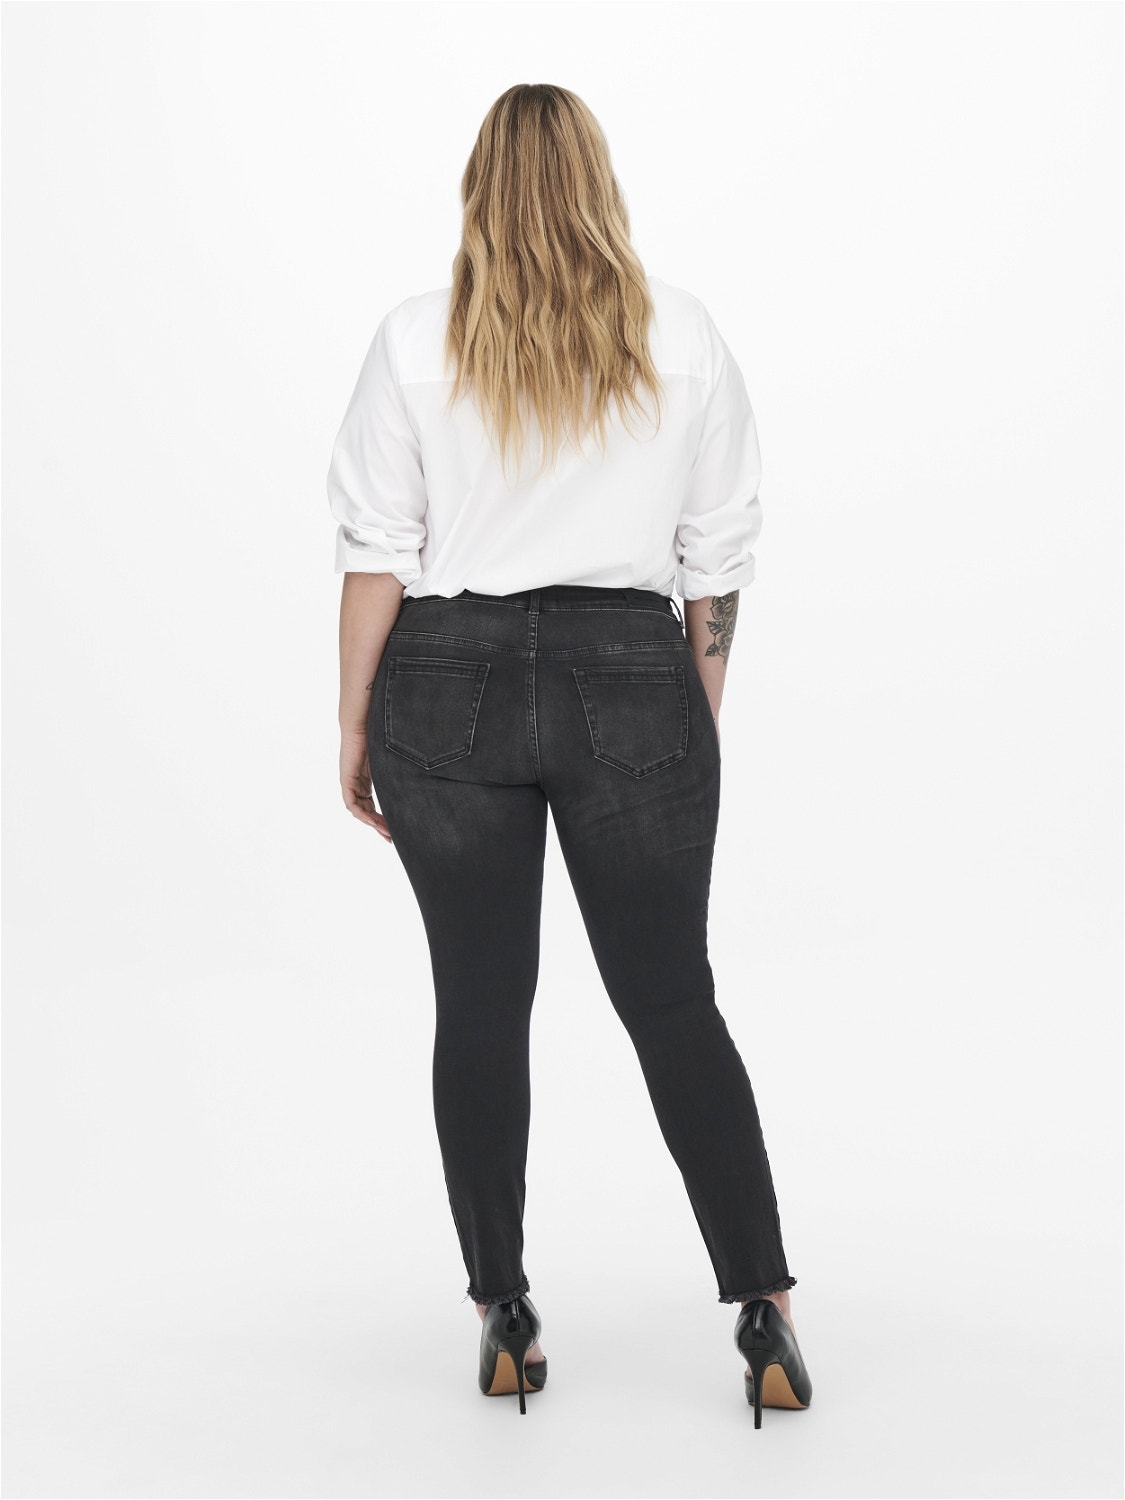 ONLY Skinny Fit Jeans -Black - 15174949